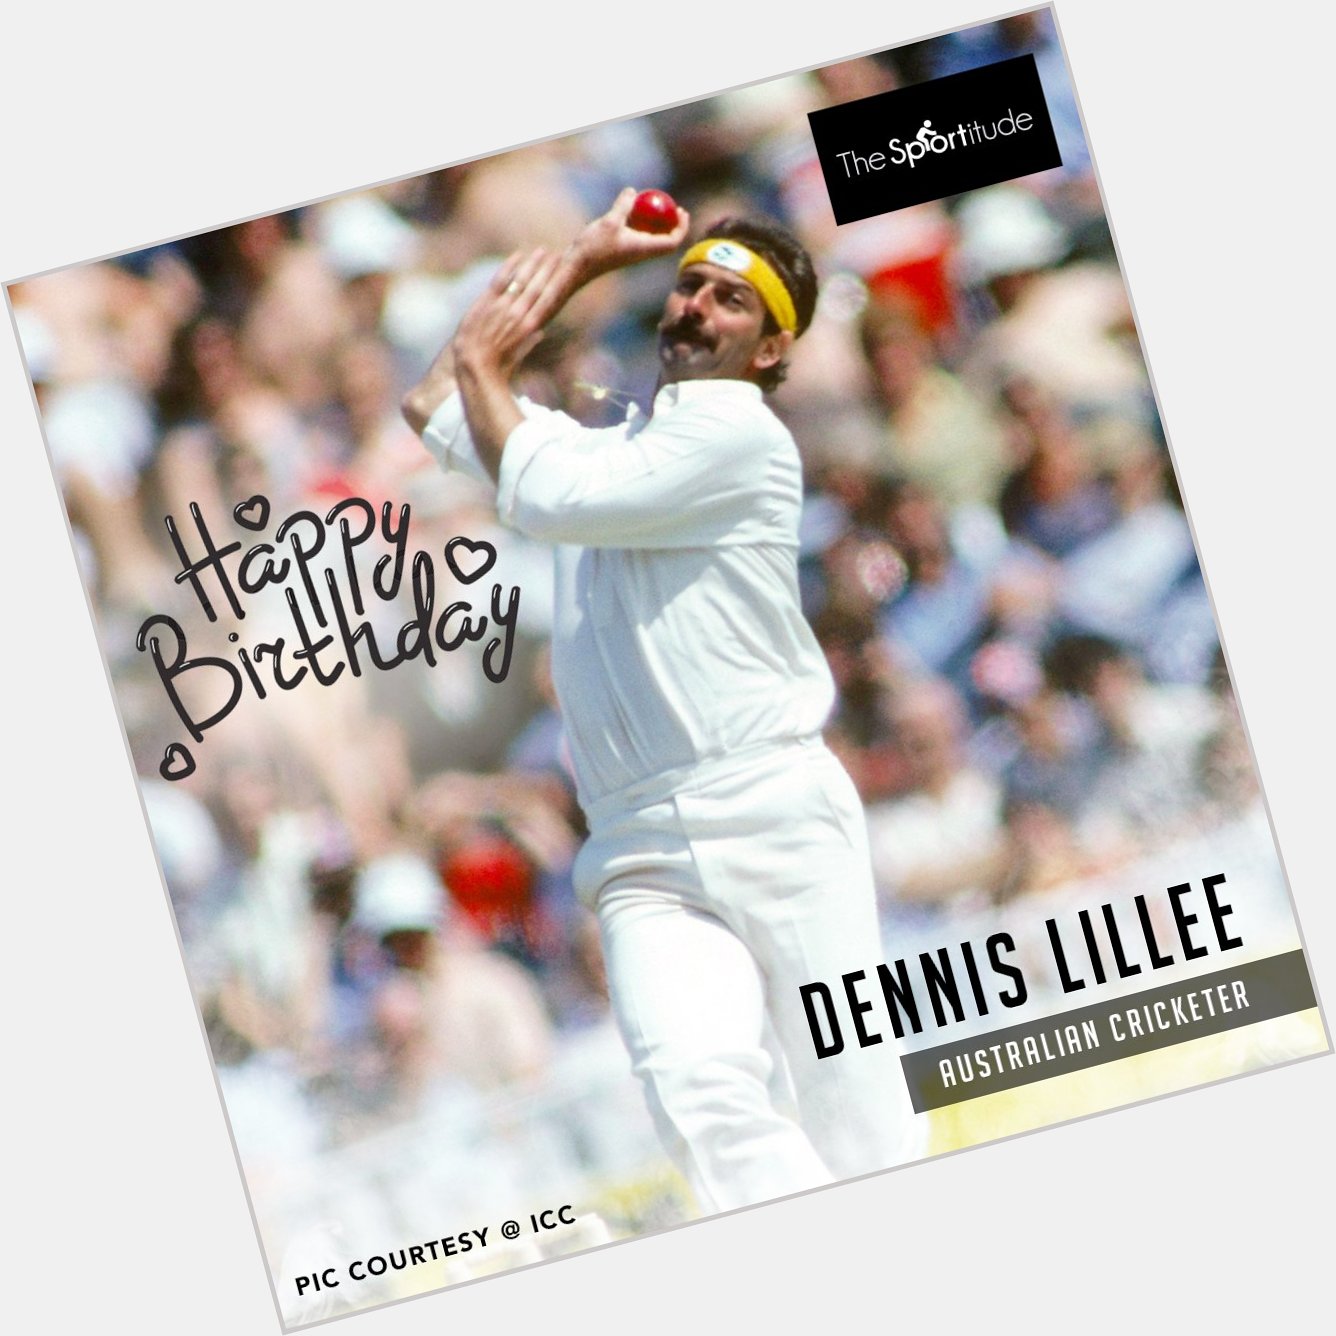 Happy birthday to Dennis Lillee, one of the greatest fast bowlers of all time! 